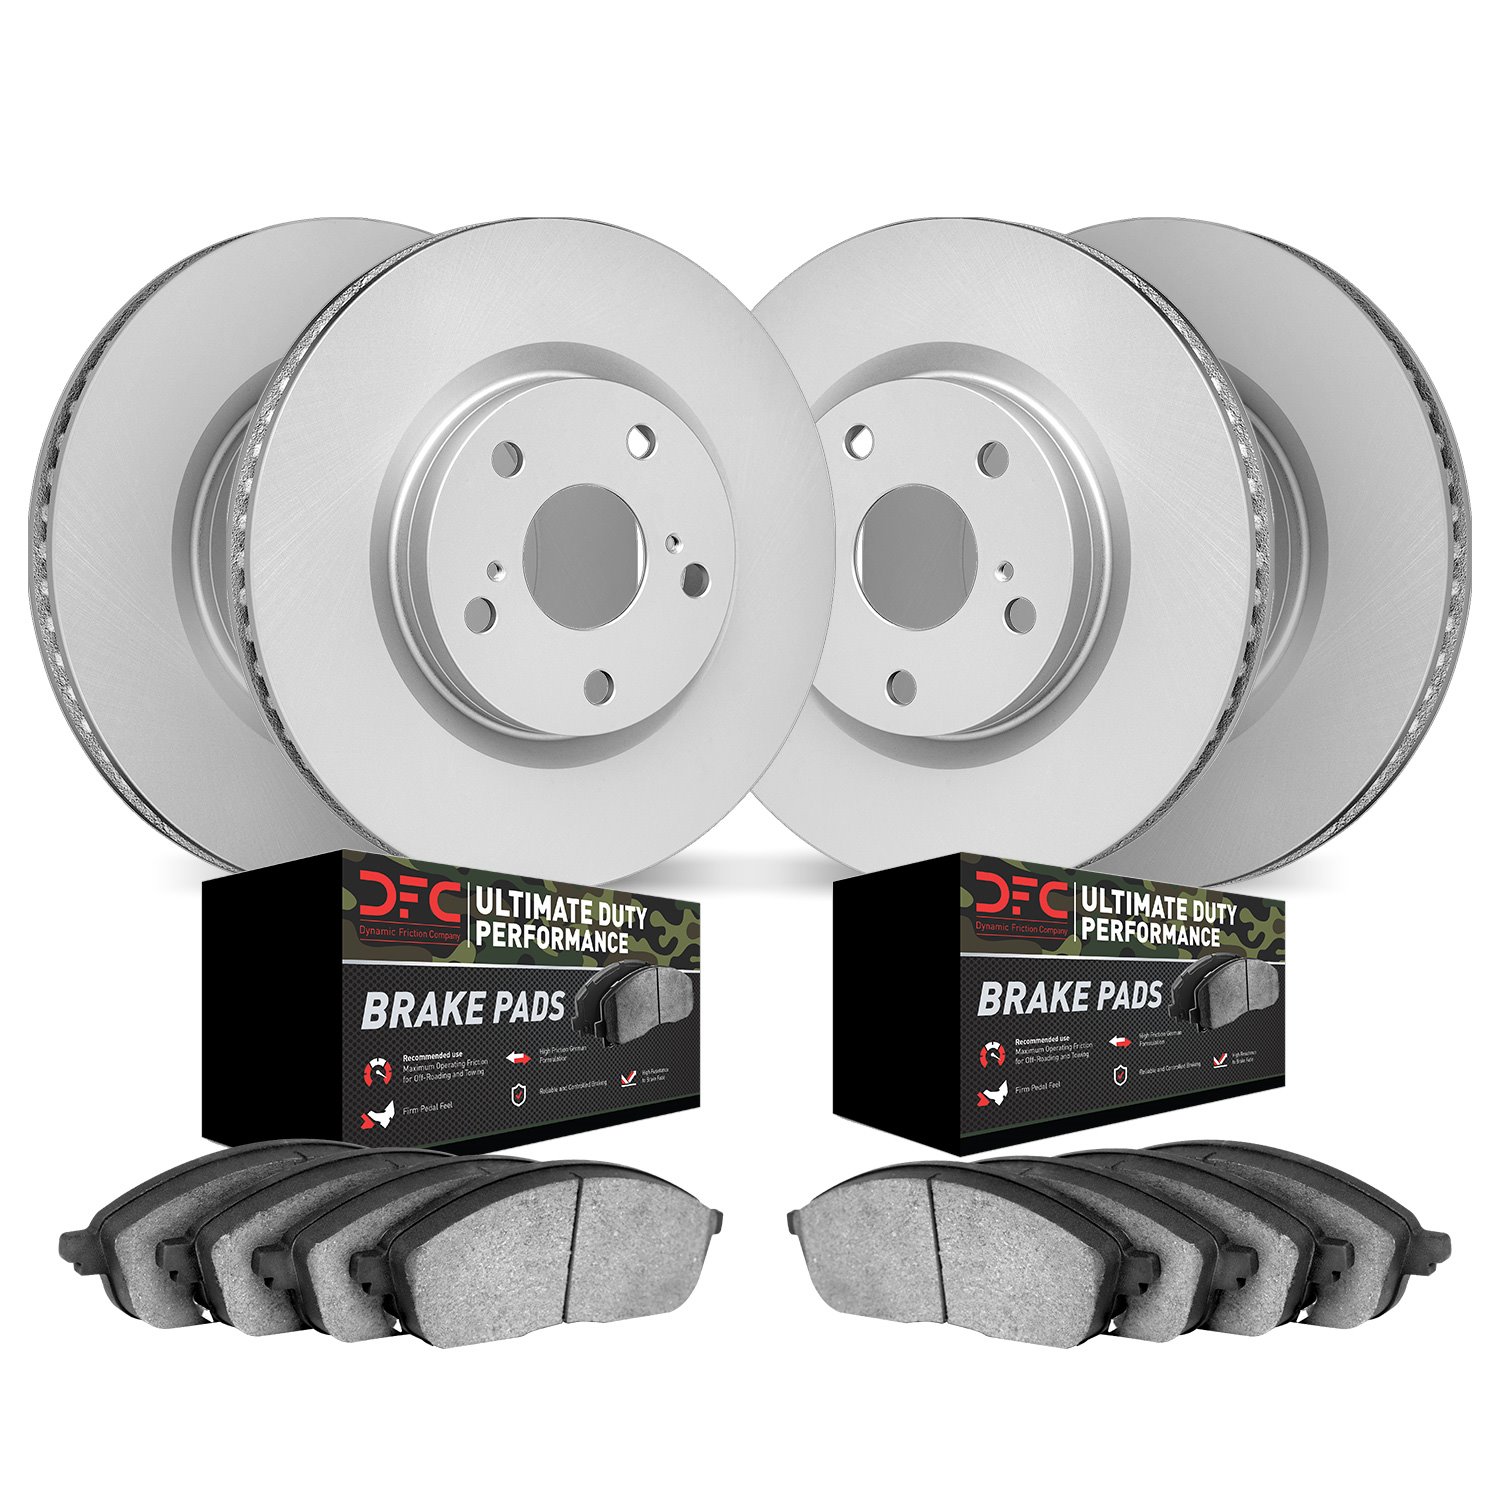 4404-42006 Geospec Brake Rotors with Ultimate-Duty Brake Pads Kit, Fits Select Mopar, Position: Front and Rear